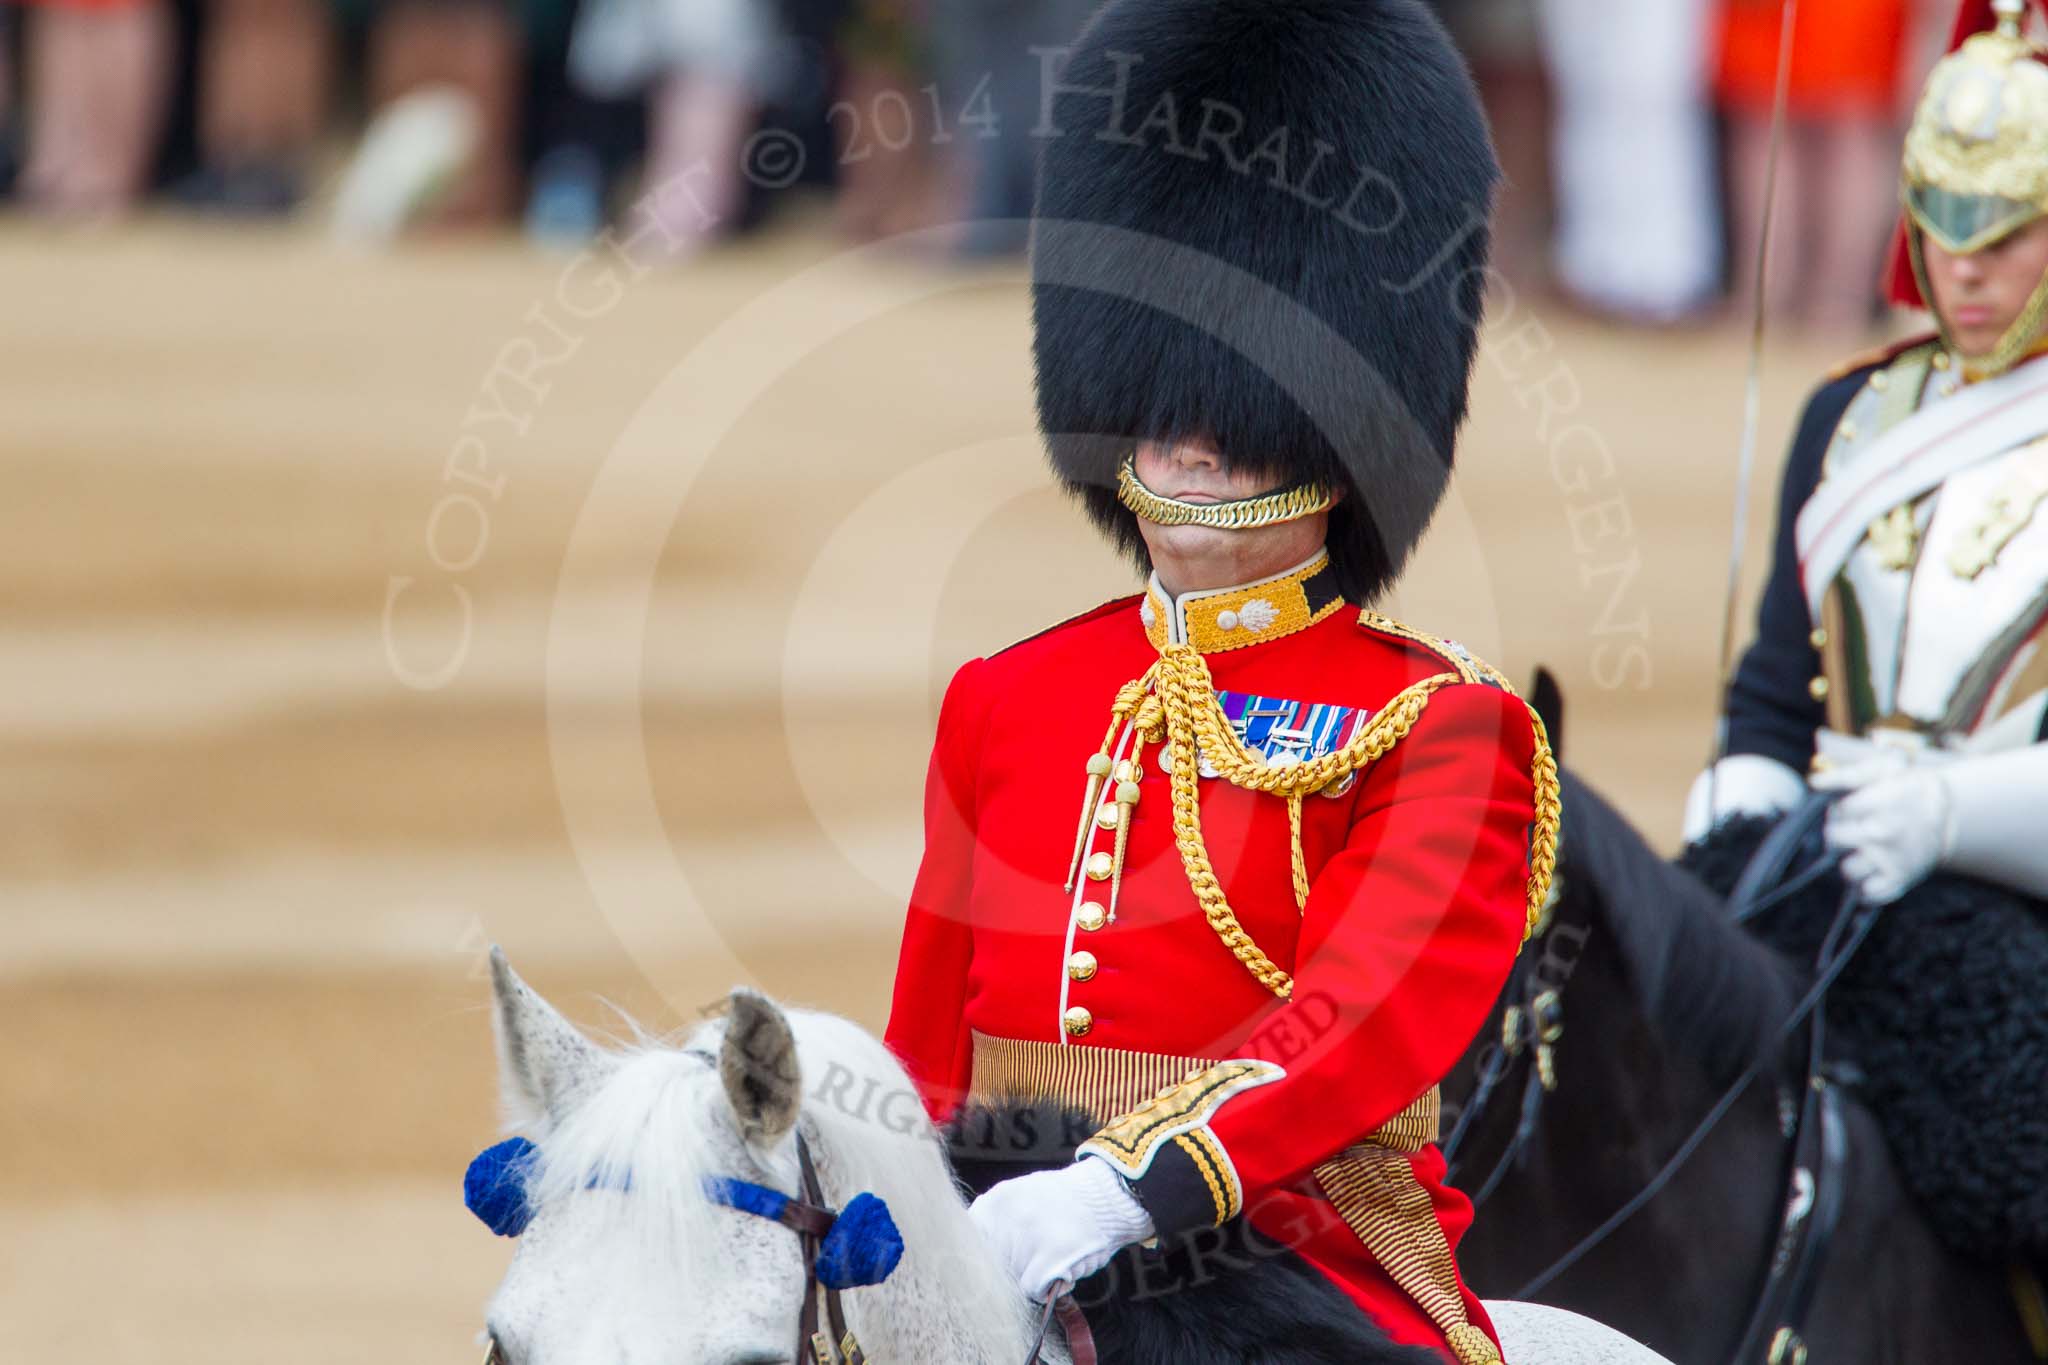 Trooping the Colour 2014.
Horse Guards Parade, Westminster,
London SW1A,

United Kingdom,
on 14 June 2014 at 10:57, image #324